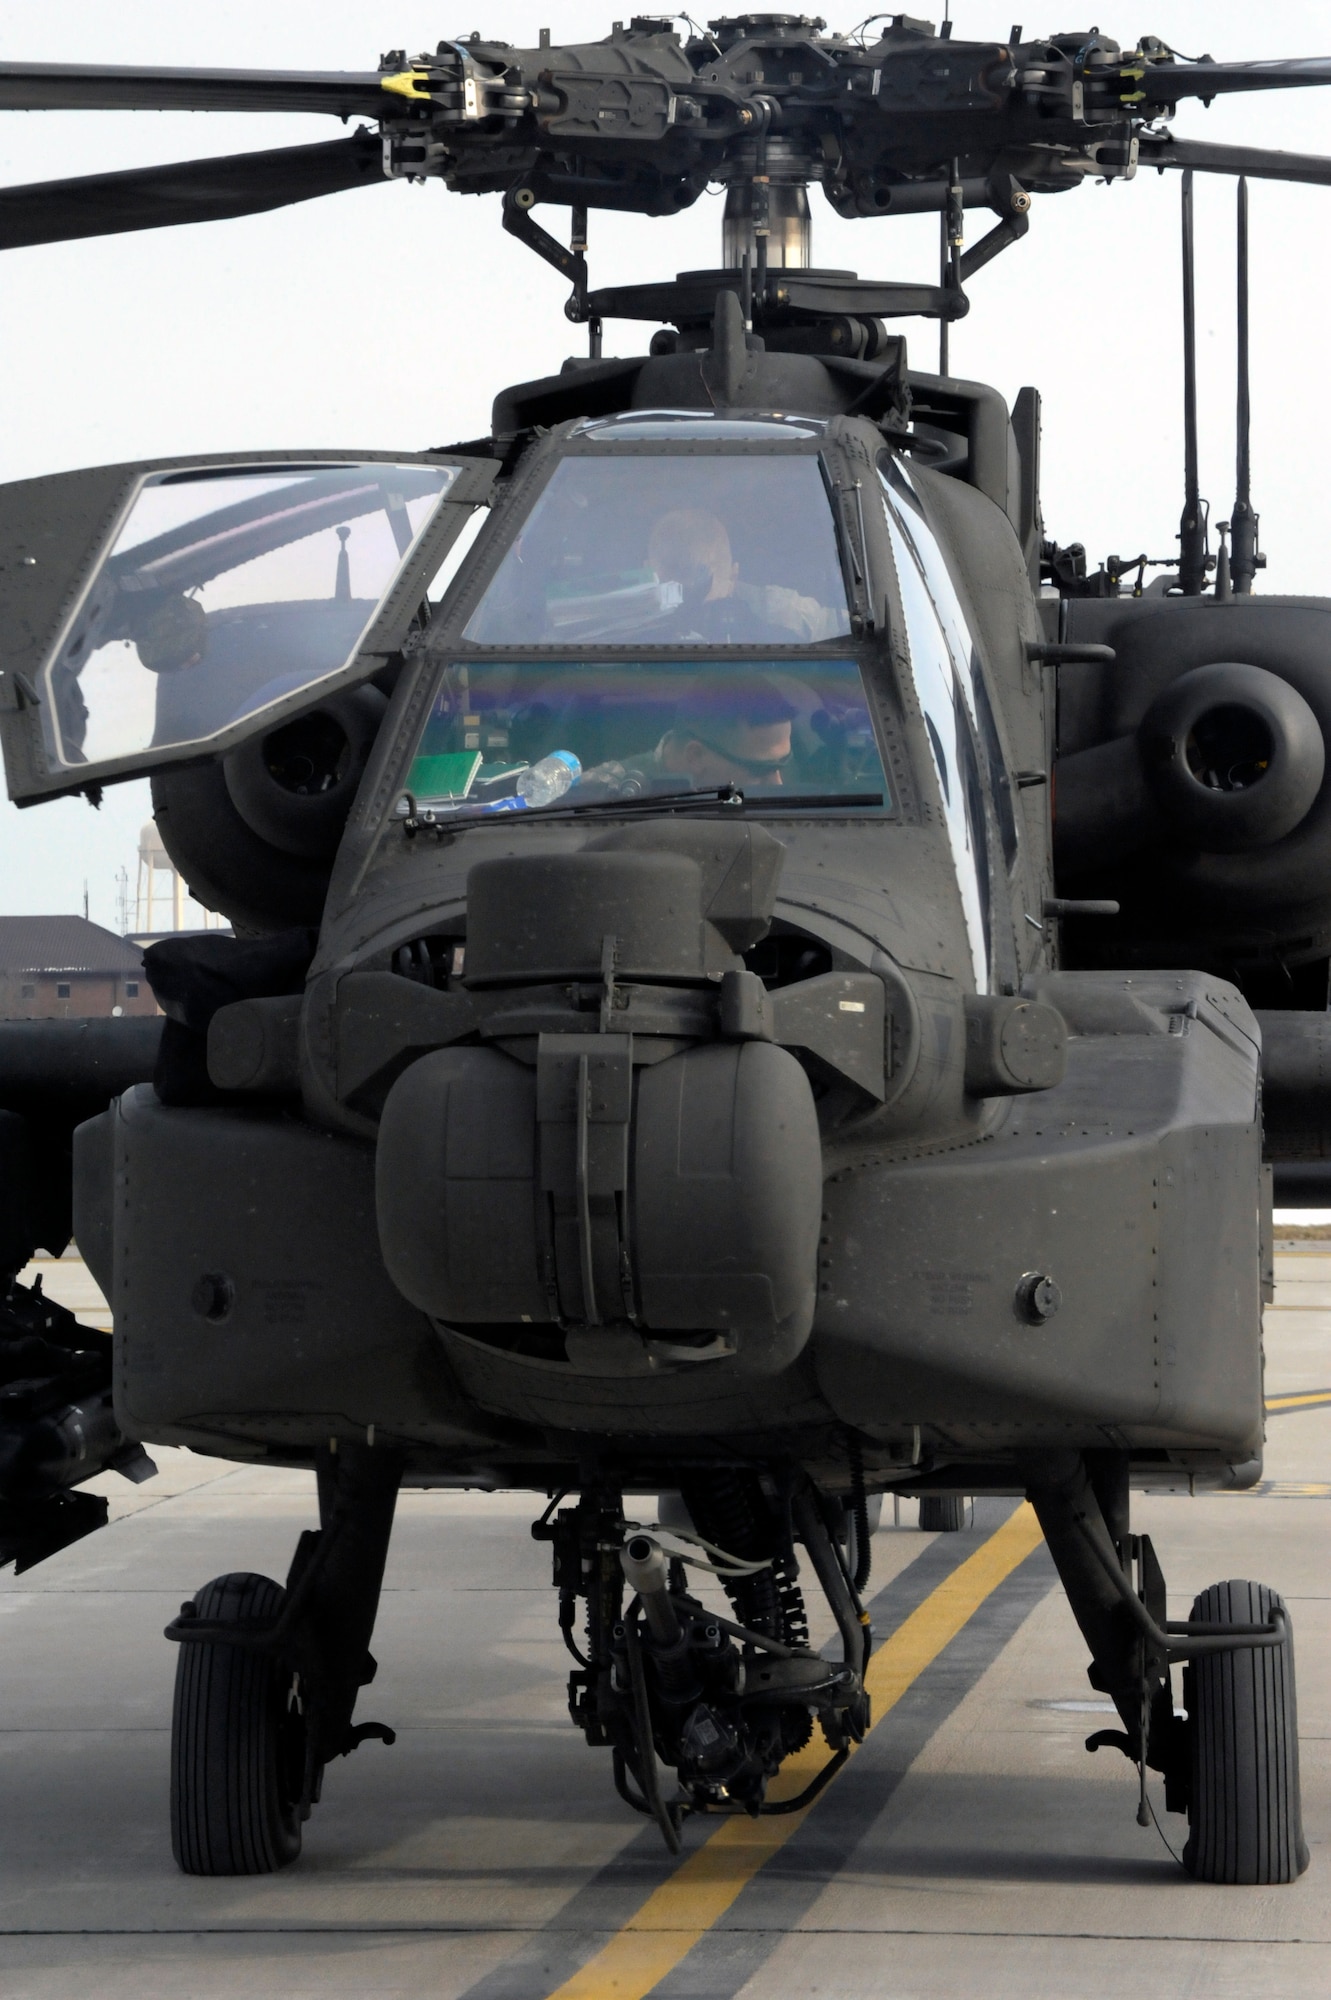 U.S. Army AH-64 Apache Longbow pilots from the 1-135th Attack Reconnaissance Battalion at Whiteman Air Force Base, Mo., prepare March 27, 2013, for their deployment to Afghanistan. The Apache Longbow is the most modernized attack helicopter in the world. (U.S. Air Force photo by Airman 1st Class Shelby R. Orozco/Released)